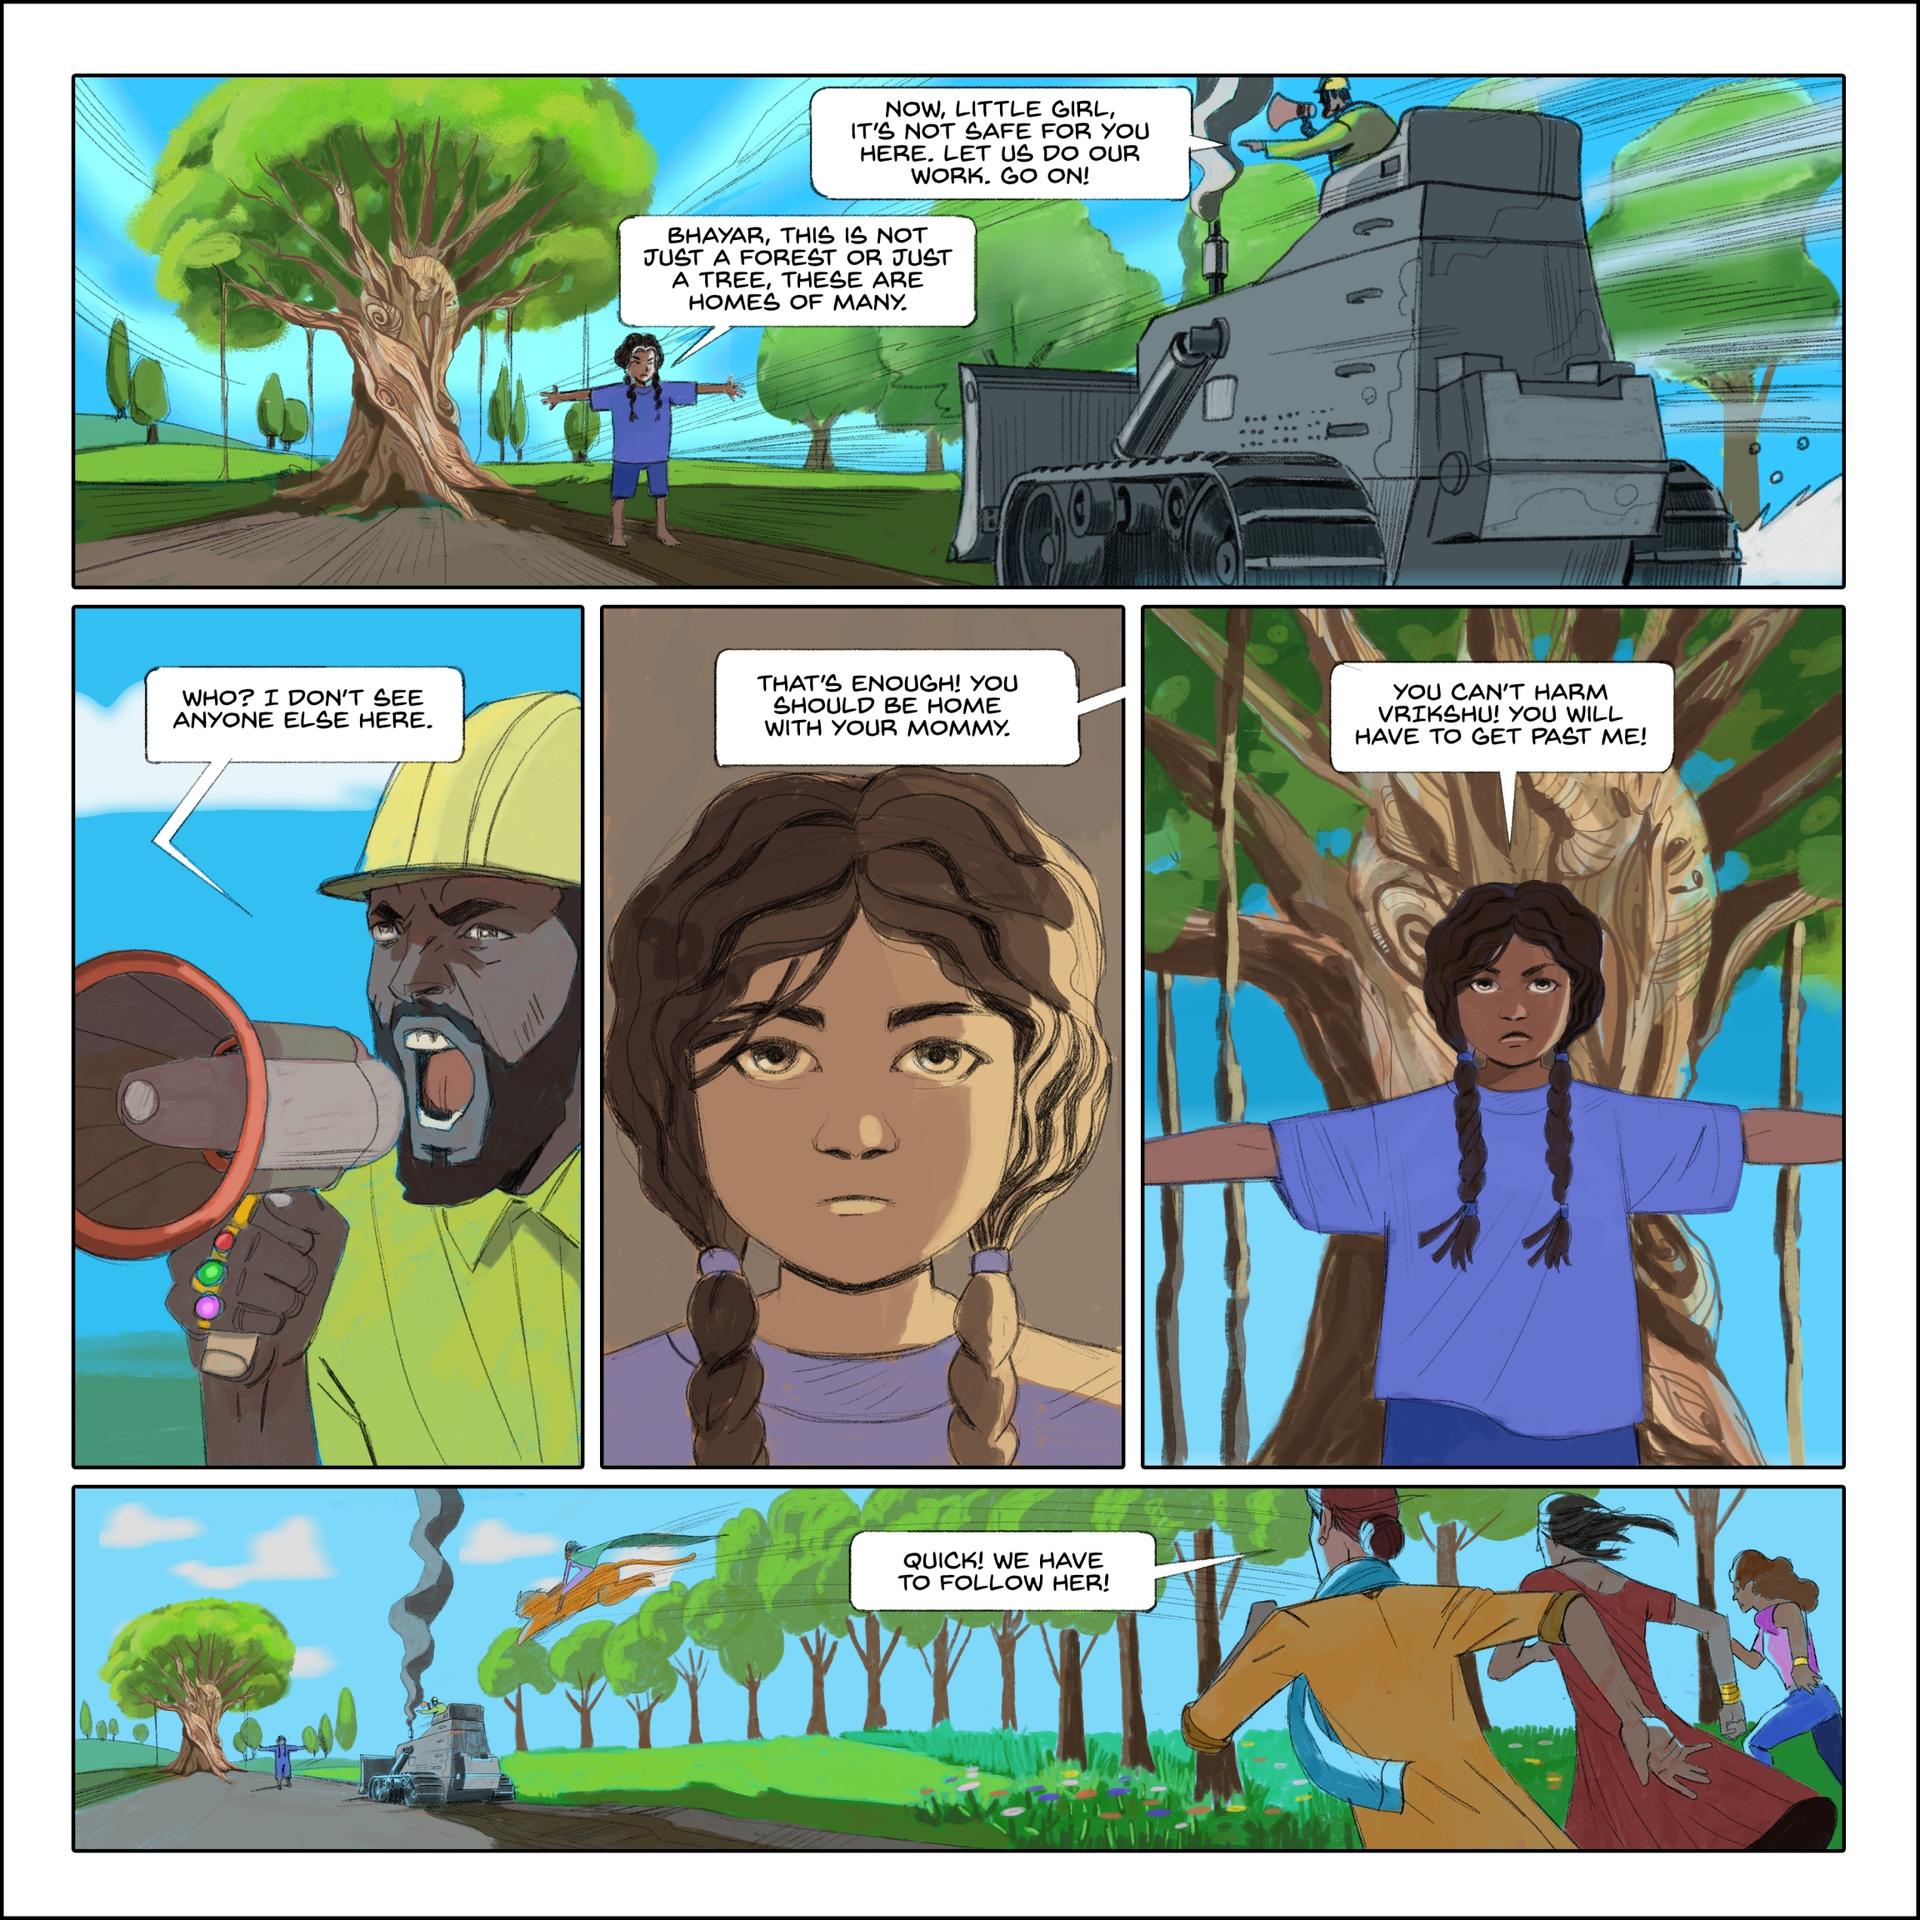 A page from the comic “Priya and the Twirling Wind” when Priya tries to save the trees from being cut down.